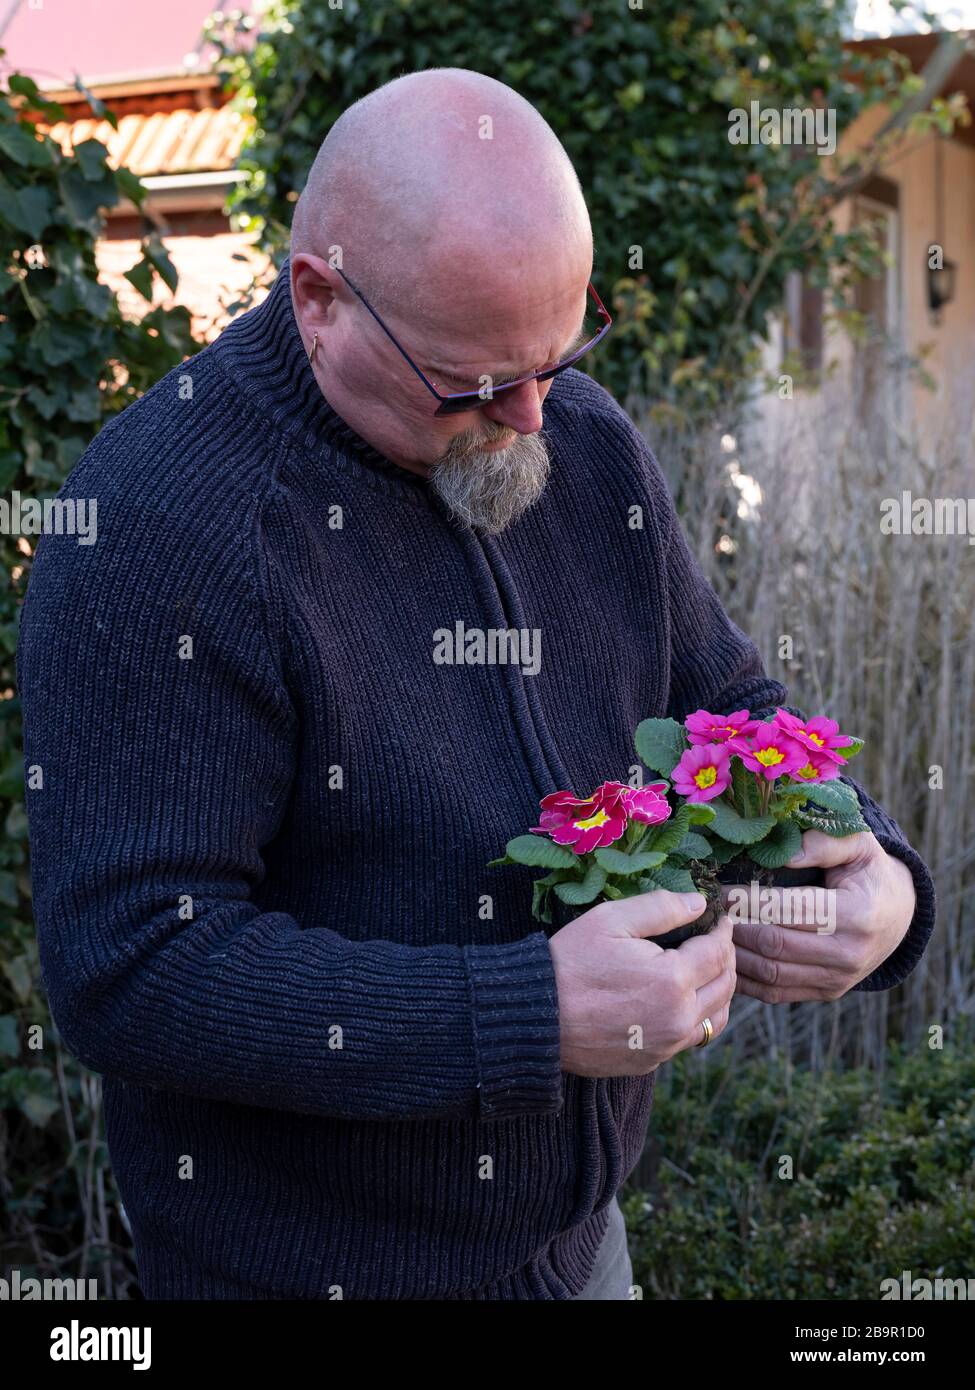 Elderly bald man is standing in the garden with pink primulas in a plastic flower pot in his hands. Pink Primrose Primula Vulgaris. Country Garden Stock Photo